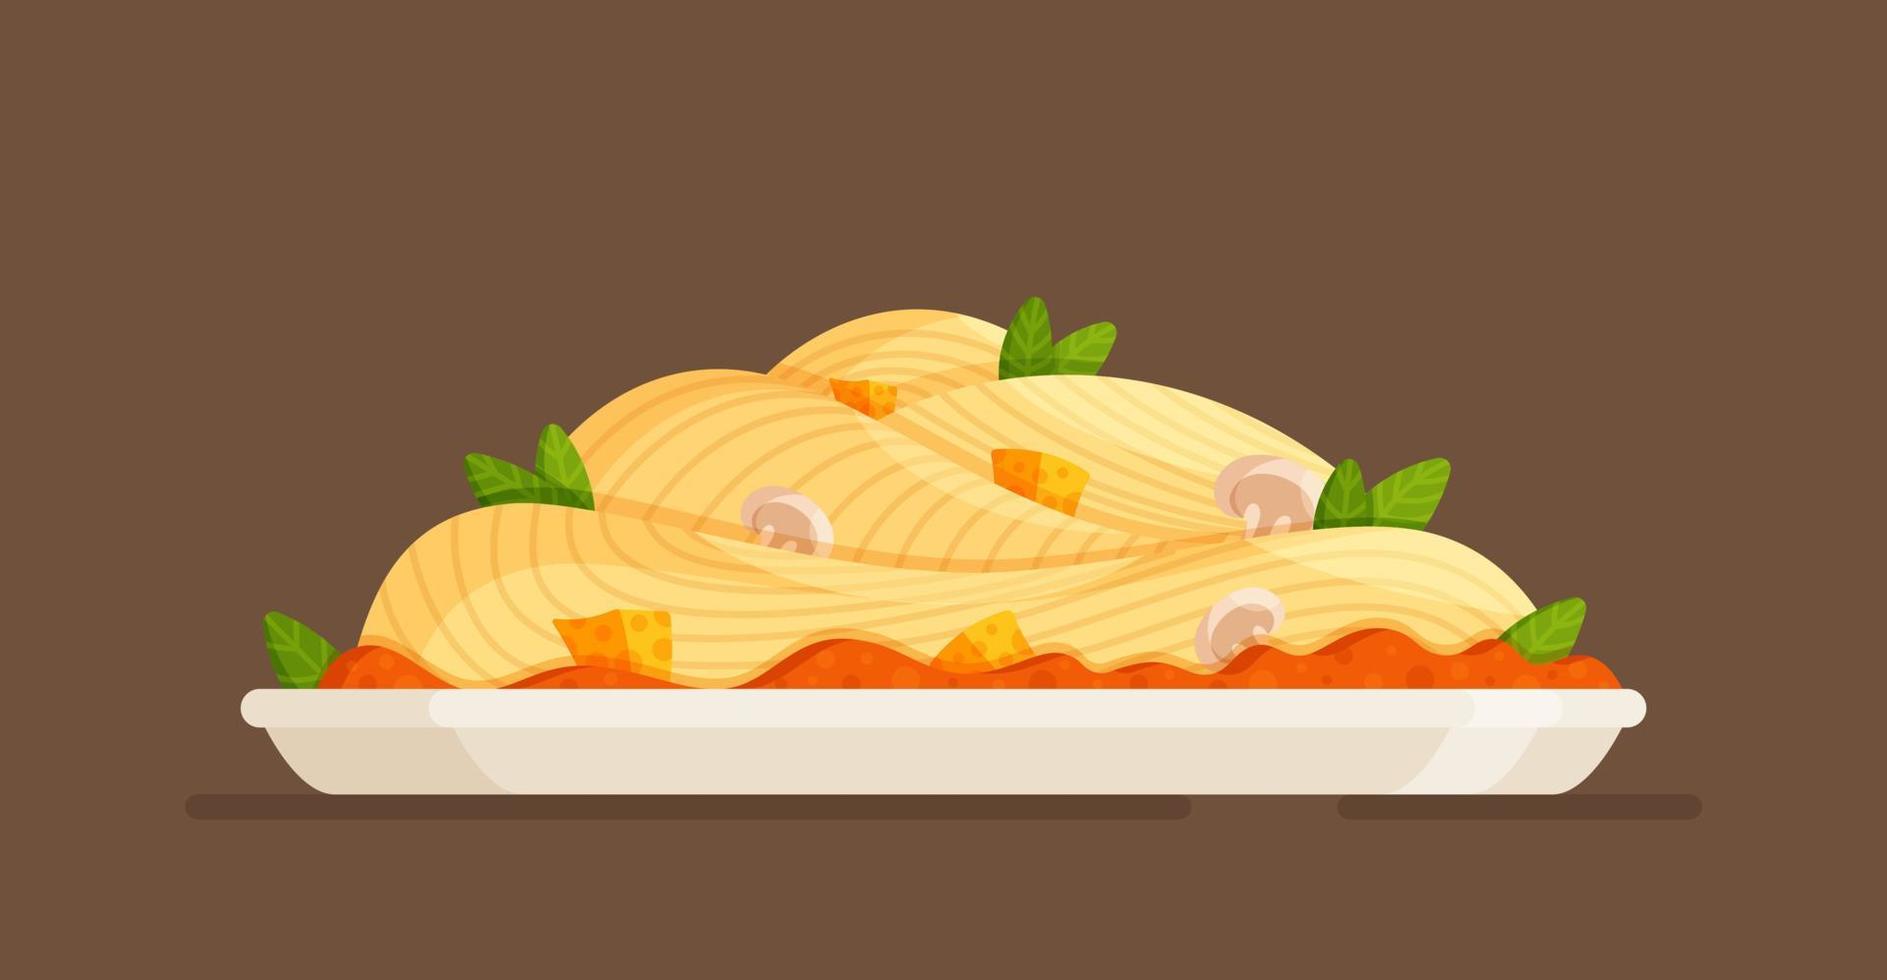 National, traditional dish of Italy. Vector illustration of a large plate of delicious pasta. hot lunch.